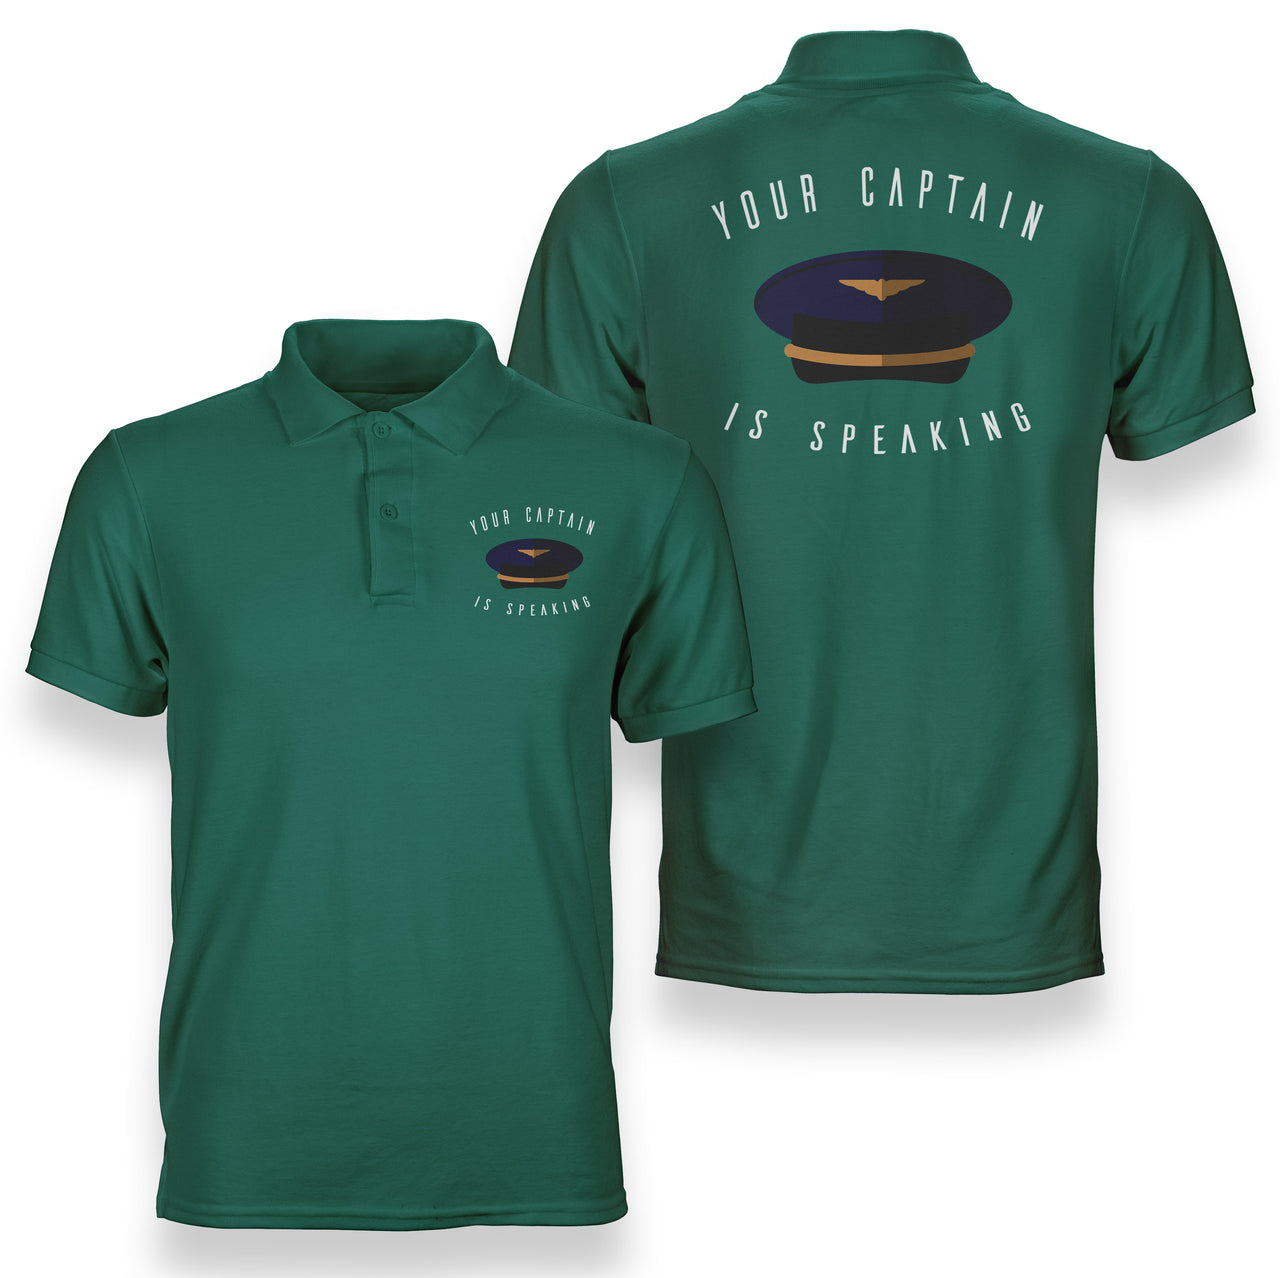 Your Captain Is Speaking Designed Double Side Polo T-Shirts